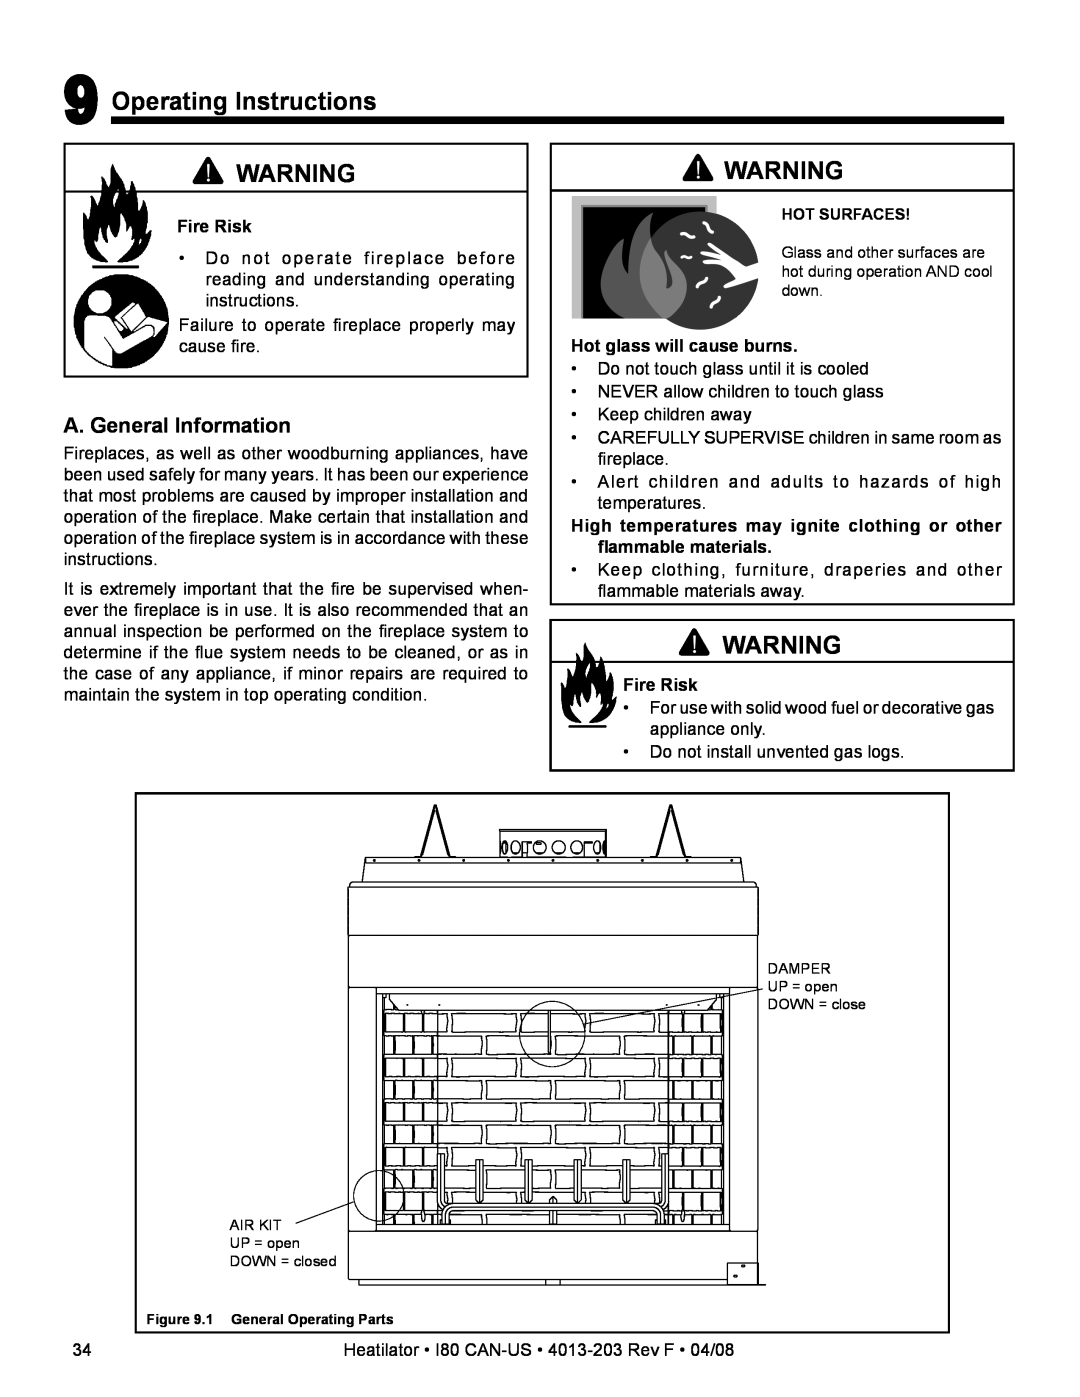 Heatiator I80 owner manual Operating Instructions, A. General Information, Fire Risk, Hot glass will cause burns 